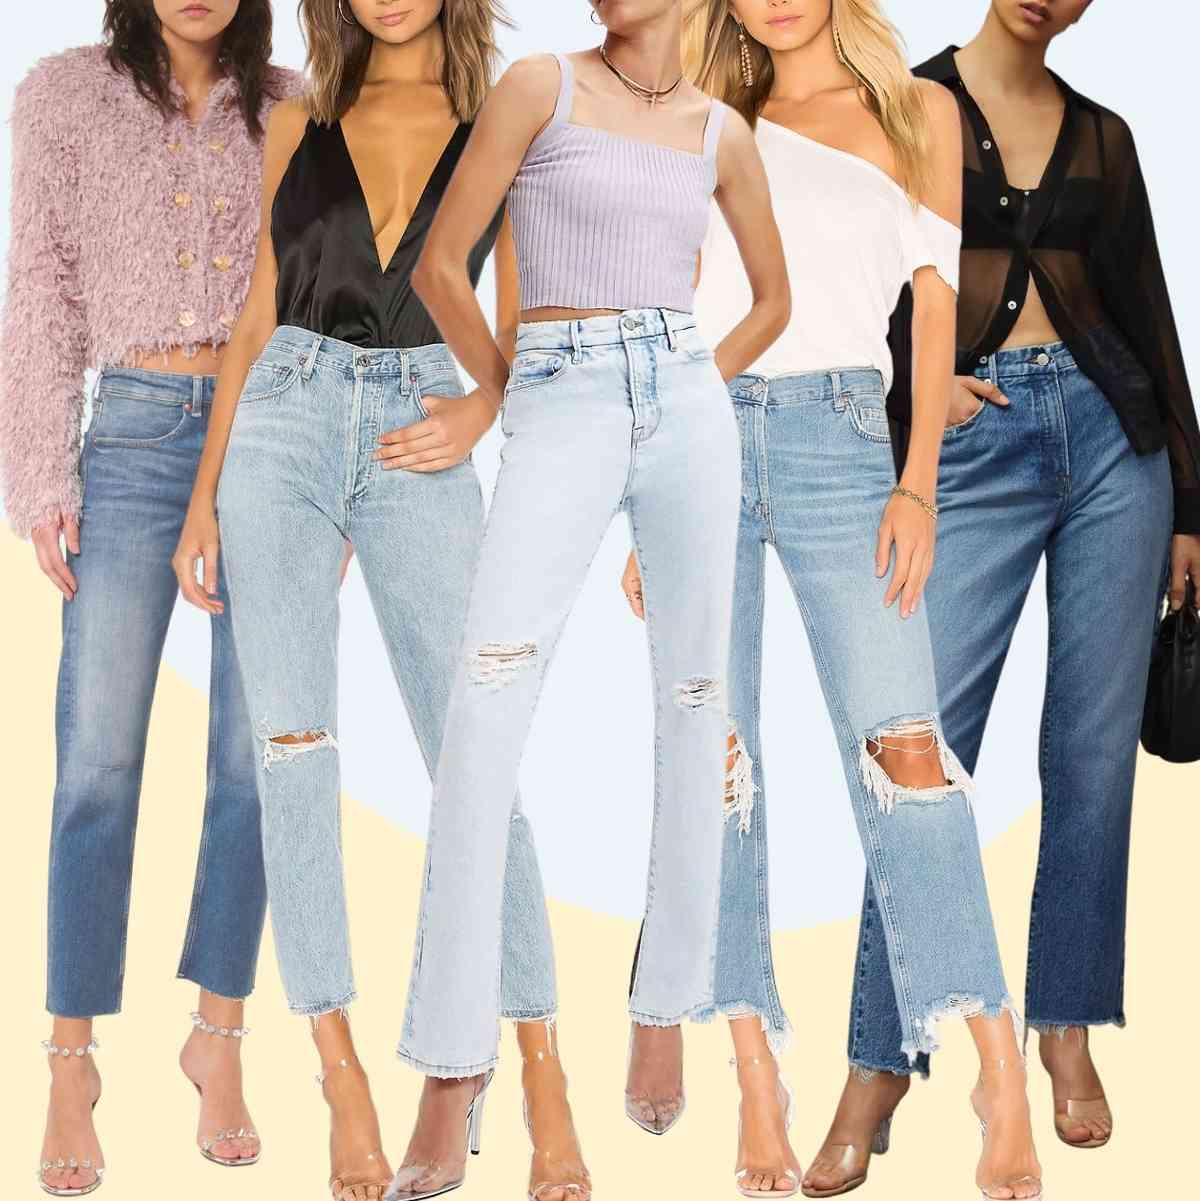 Collage of 5 women wearing different clear heel outfits with jeans.